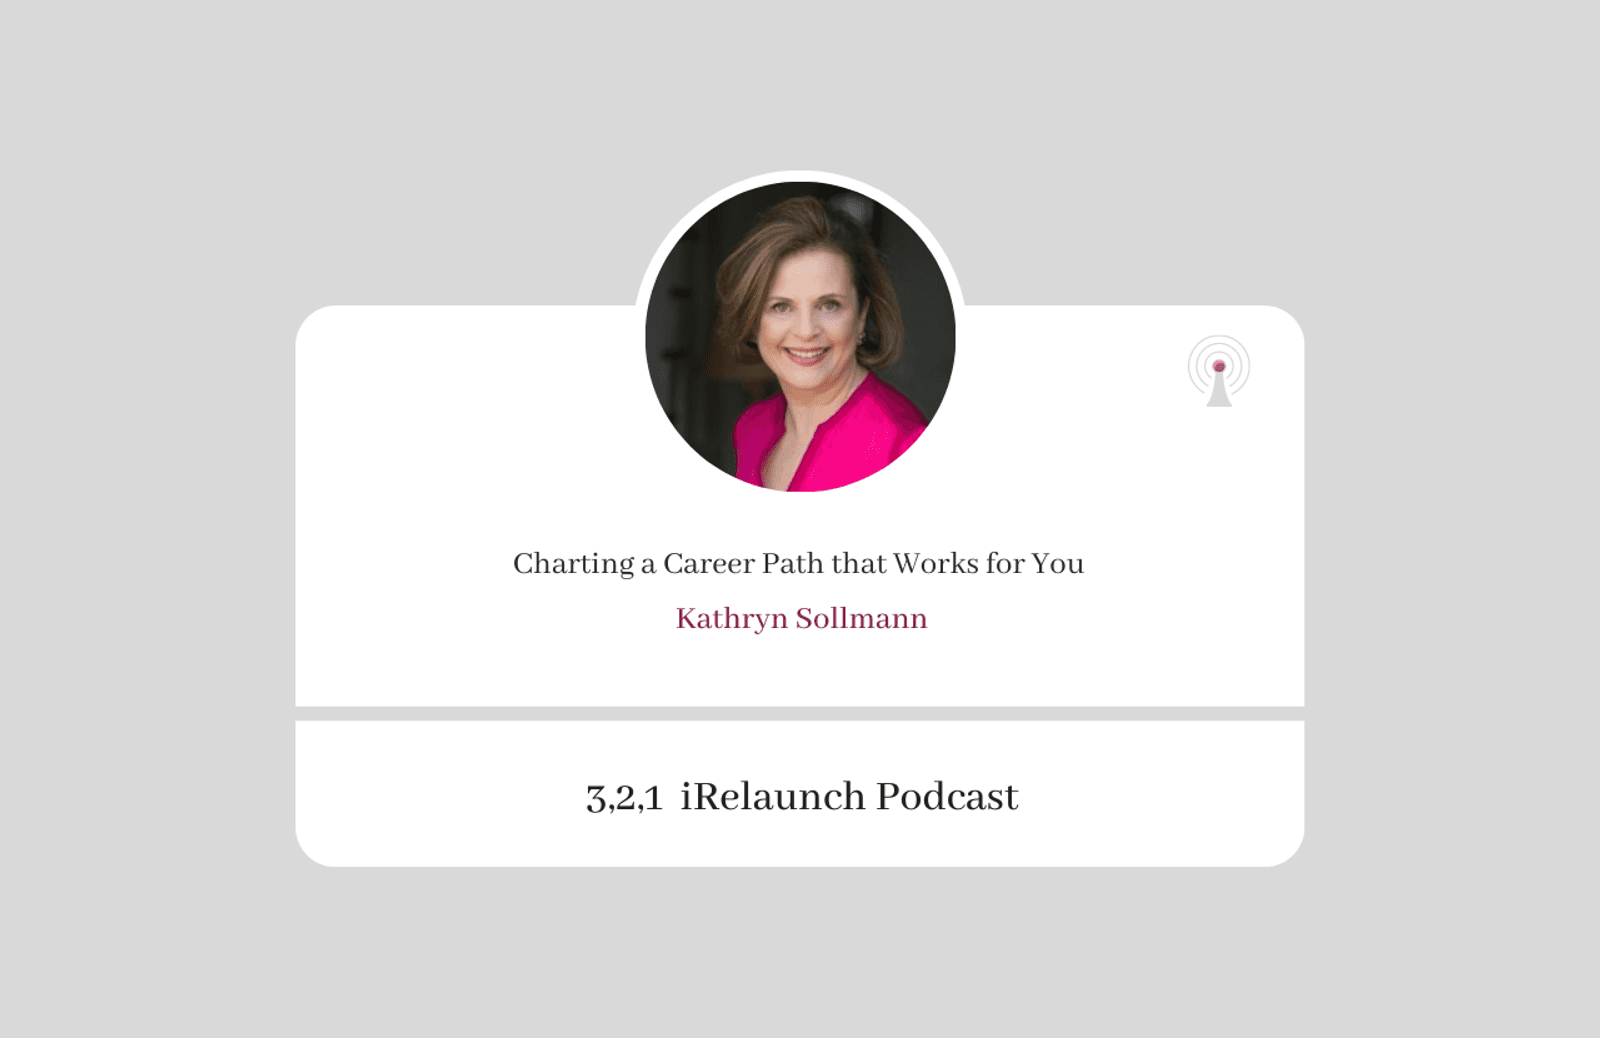 3, 2, 1 iRelaunch Podcast Thumbnail for Episode #71 with Kathryn Sollmann's headshot. The episode's title is: "Charting a Career Path that Works for You."